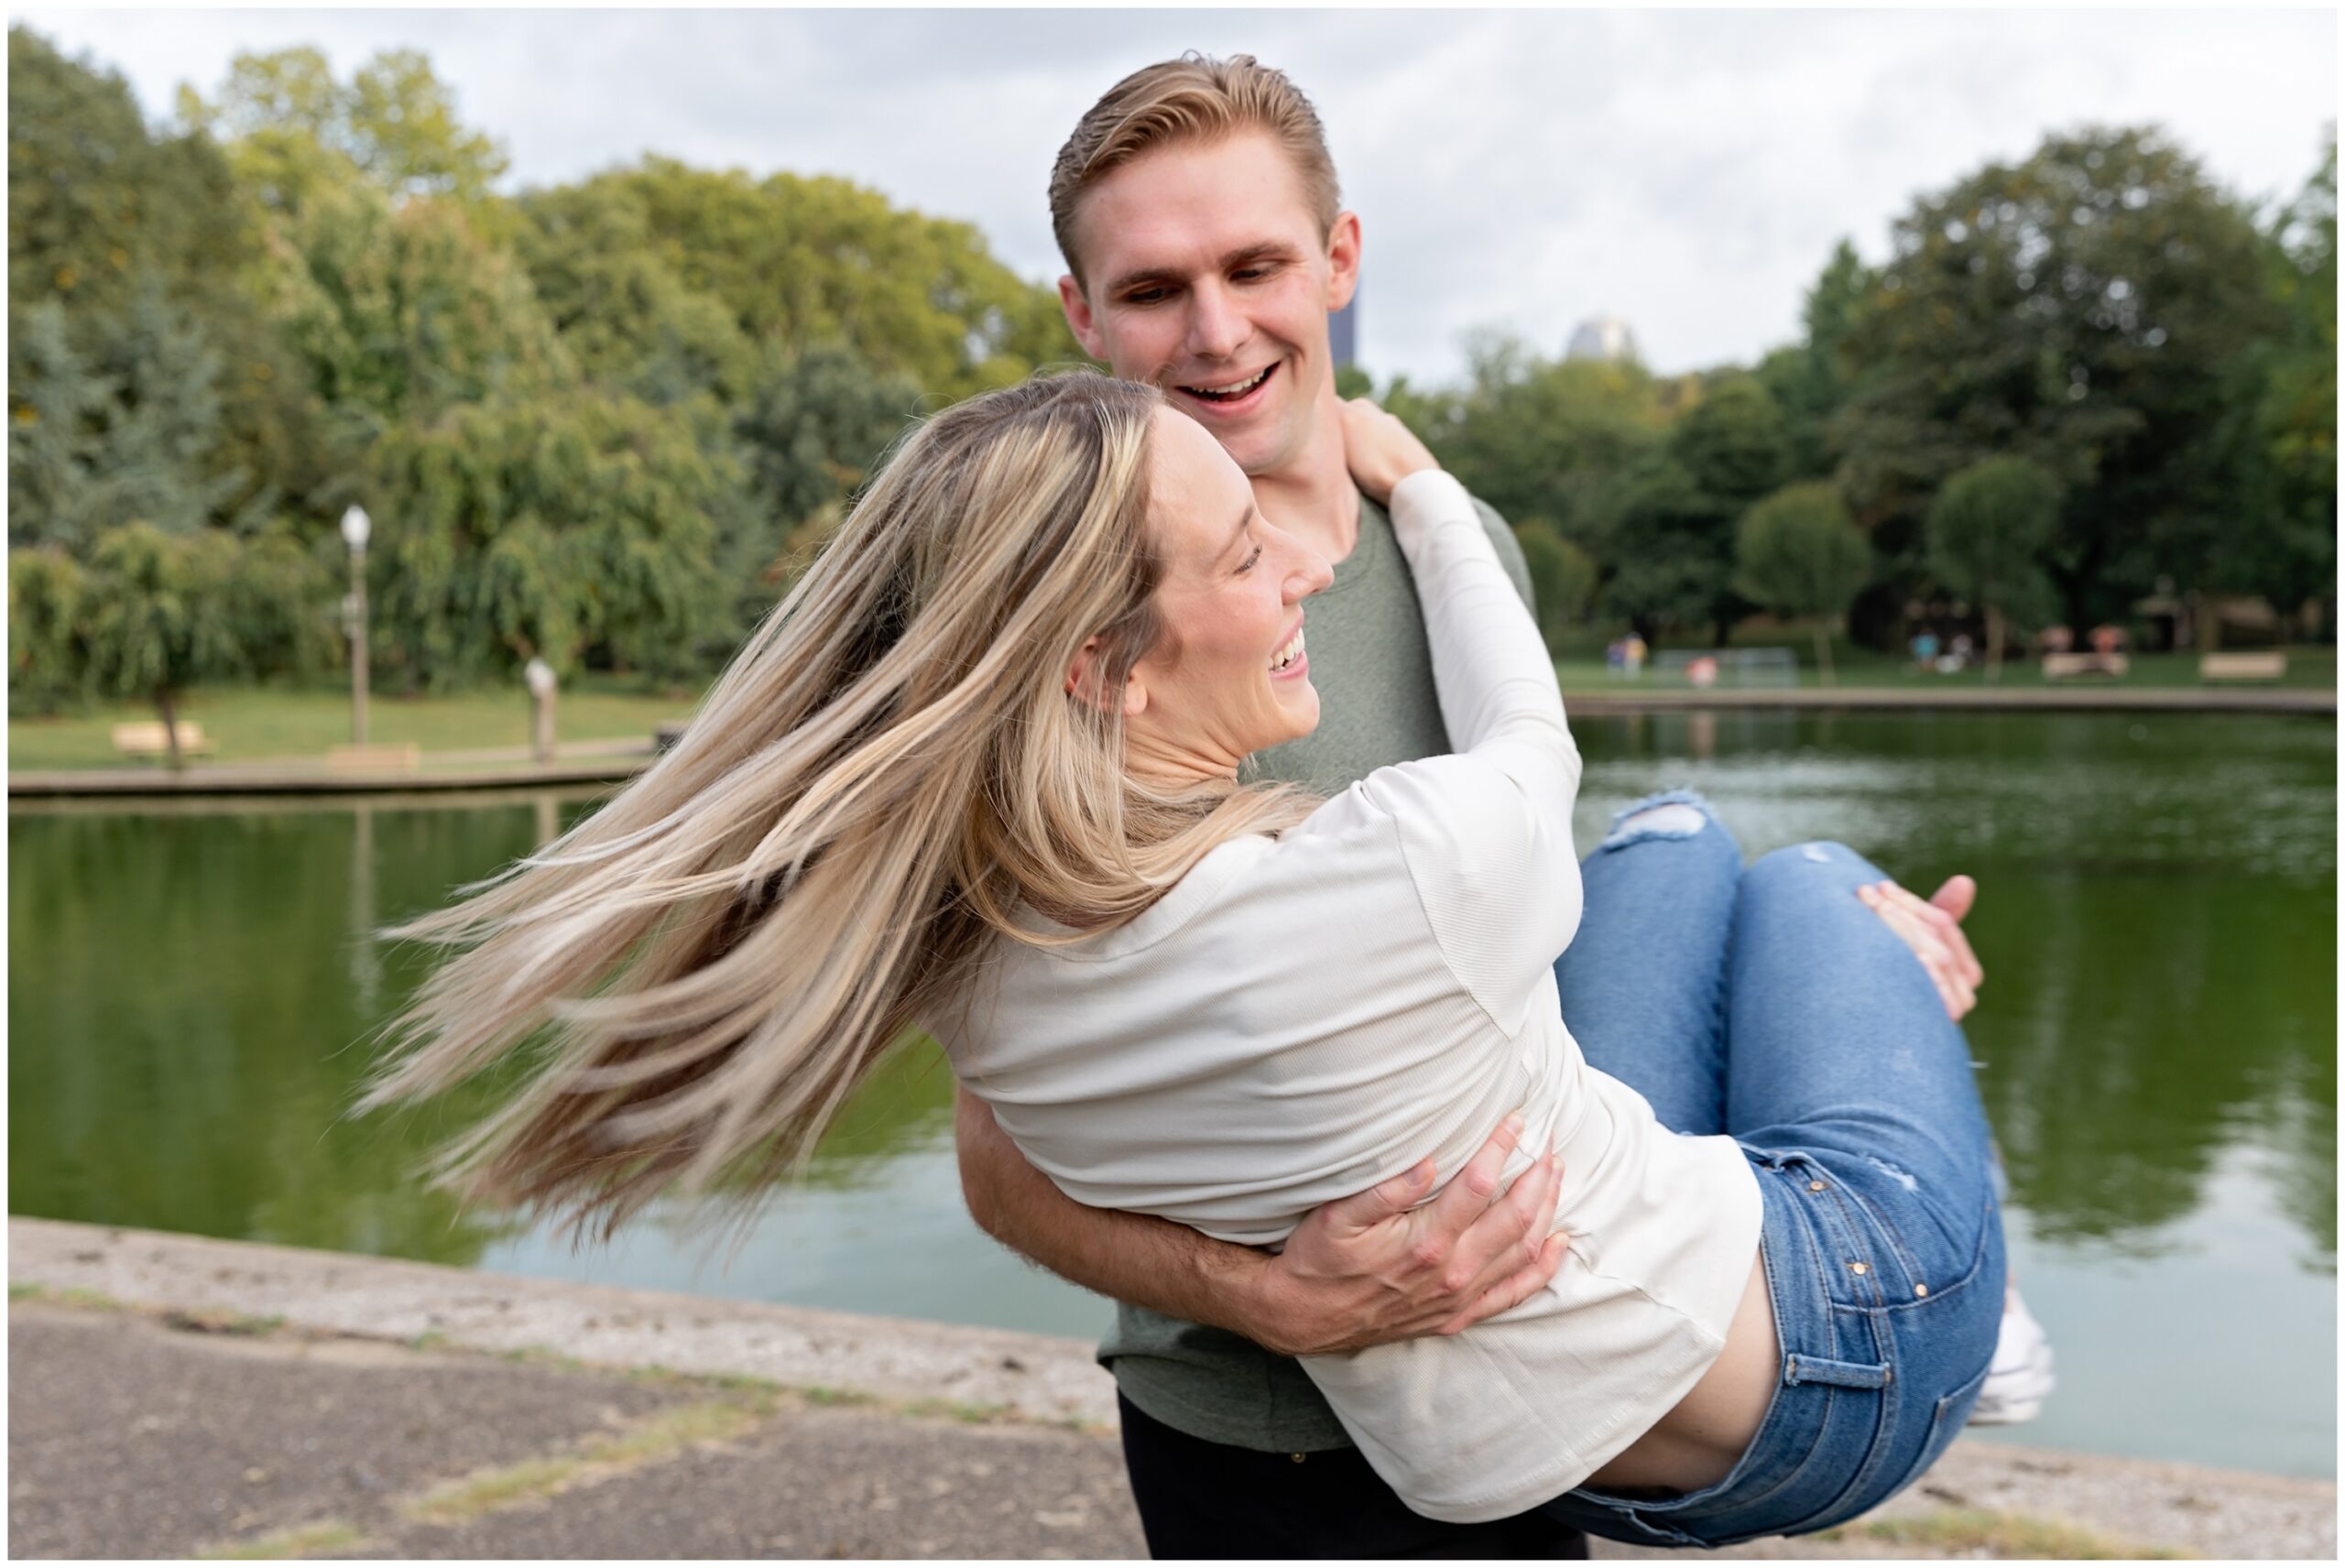 Allegheny Commons Park, Lake Elizabeth Engagement Session in Pittsburgh PA photographed by Pittsburgh Wedding Photographer Catherine Acevedo Photography